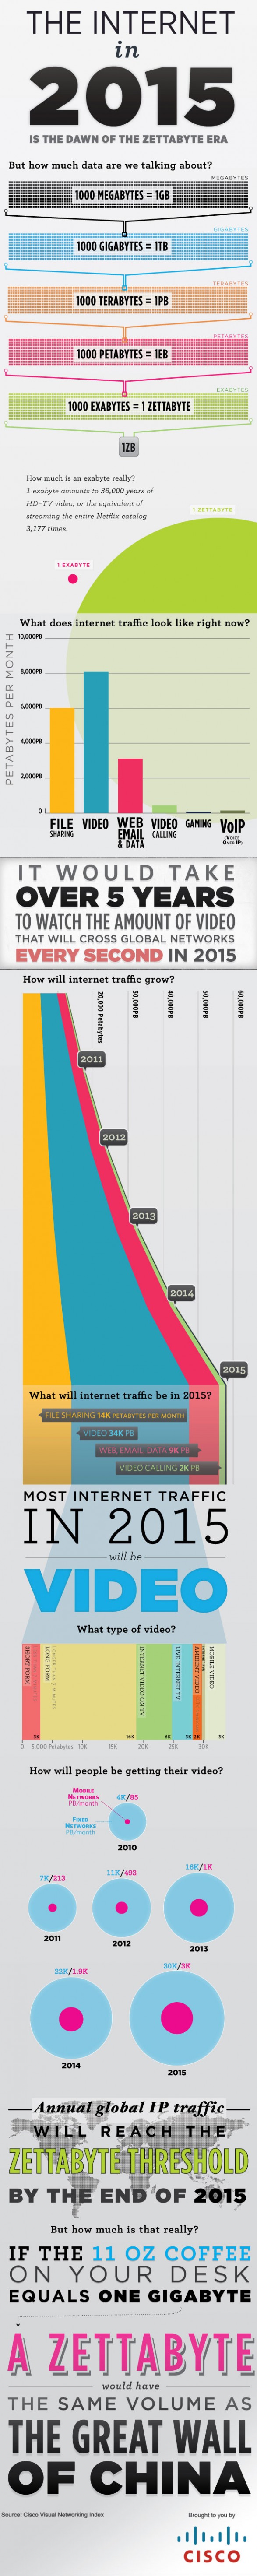 The-Internet-In-2015-infographic